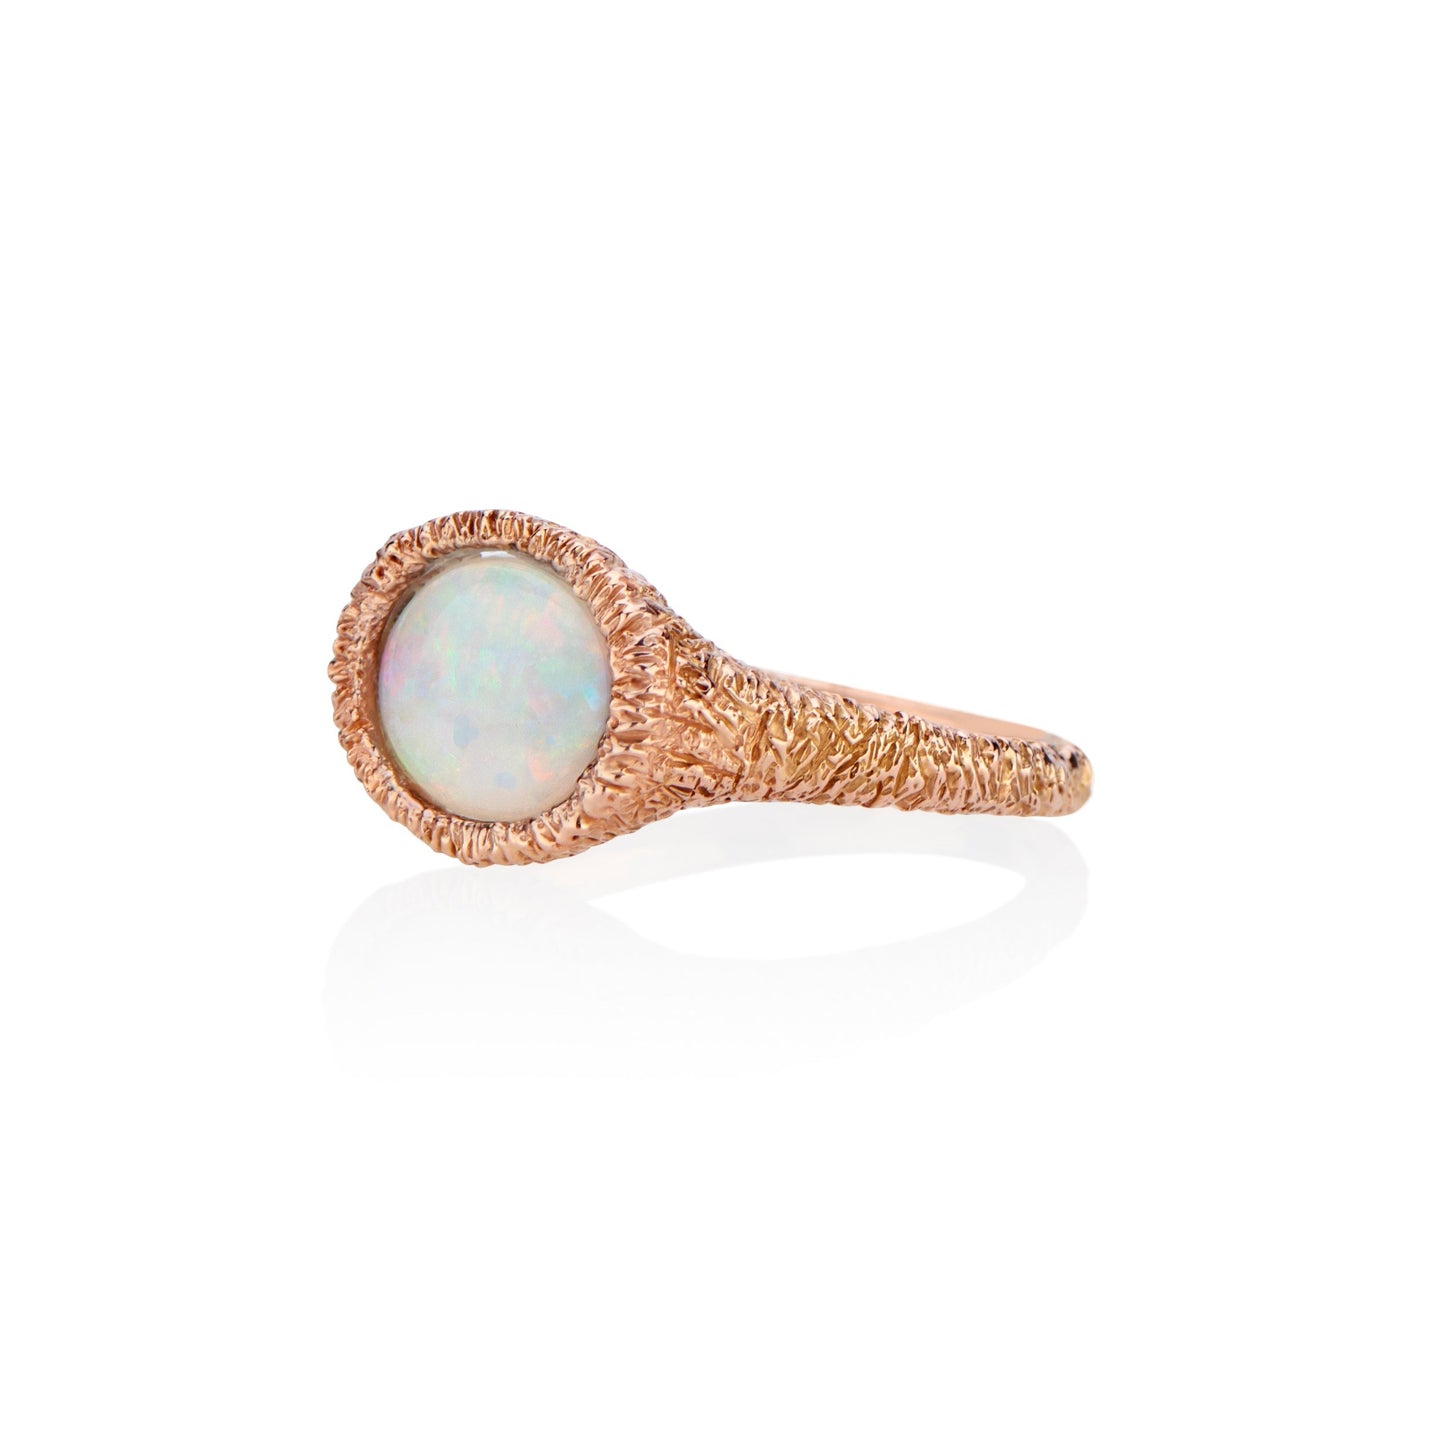 Fire Opal Signet Ring With Organic Tree Bark Texture